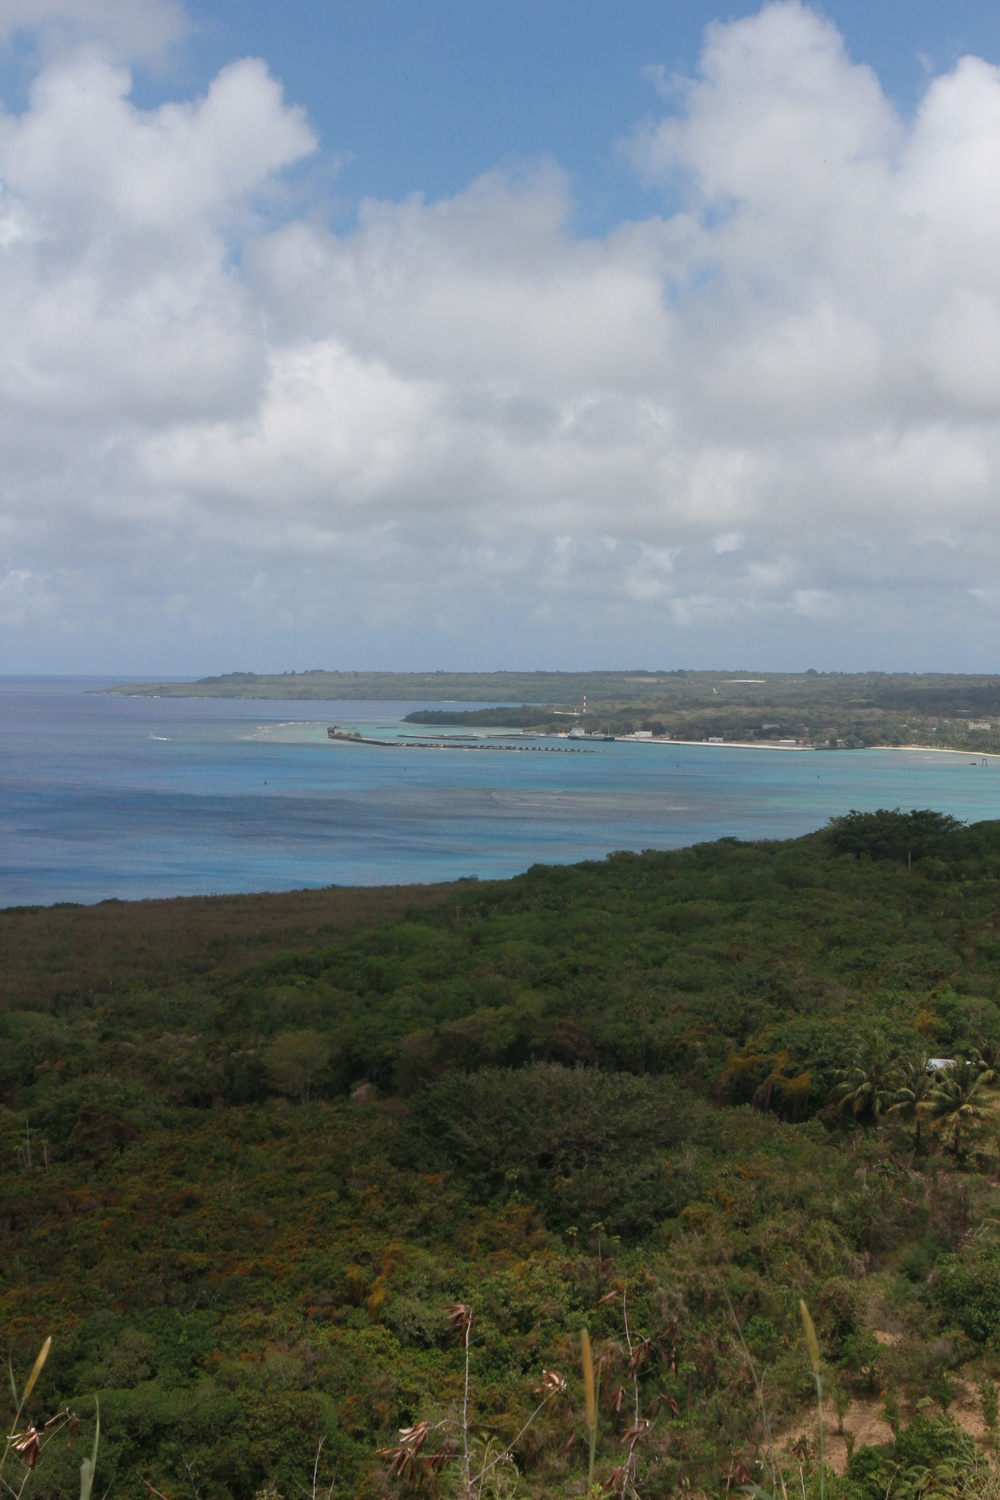 Residents comment on live-fire ranges, training areas proposed for Tinian, Pagan